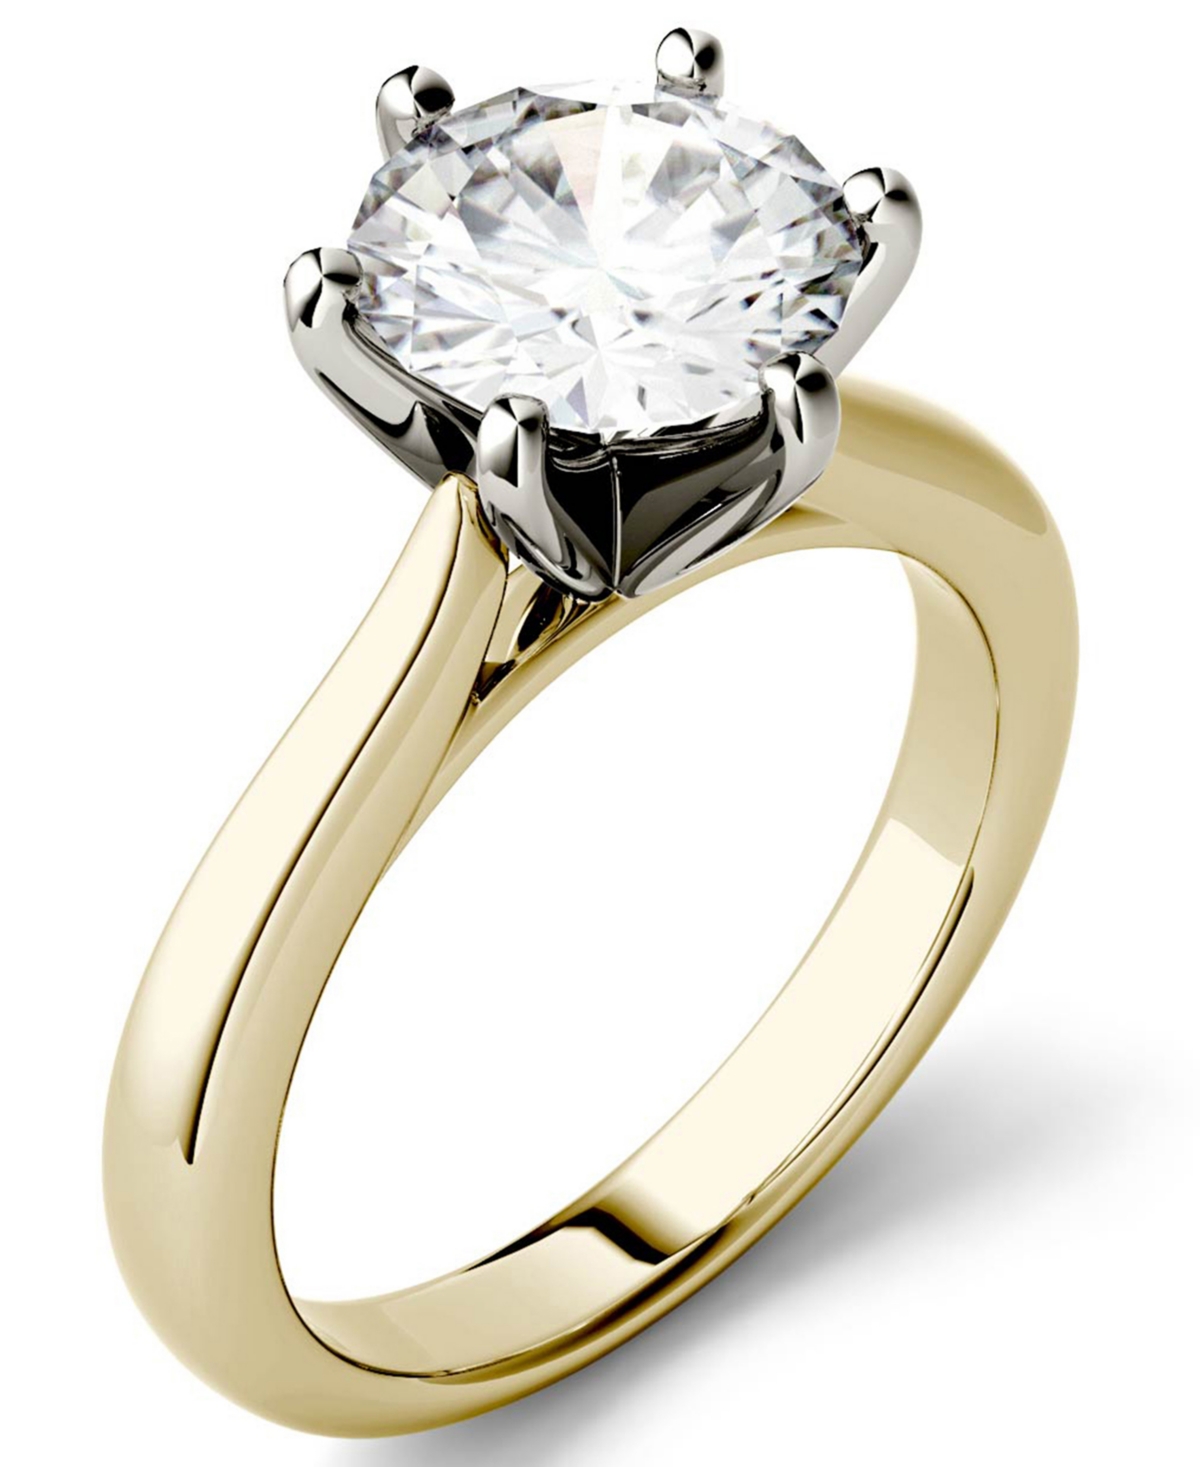 Charles & Colvard Moissanite Solitaire Engagement Ring 1-9/10 ct. t.w. Diamond Equivalent in 14k White, Yellow or Rose Gold